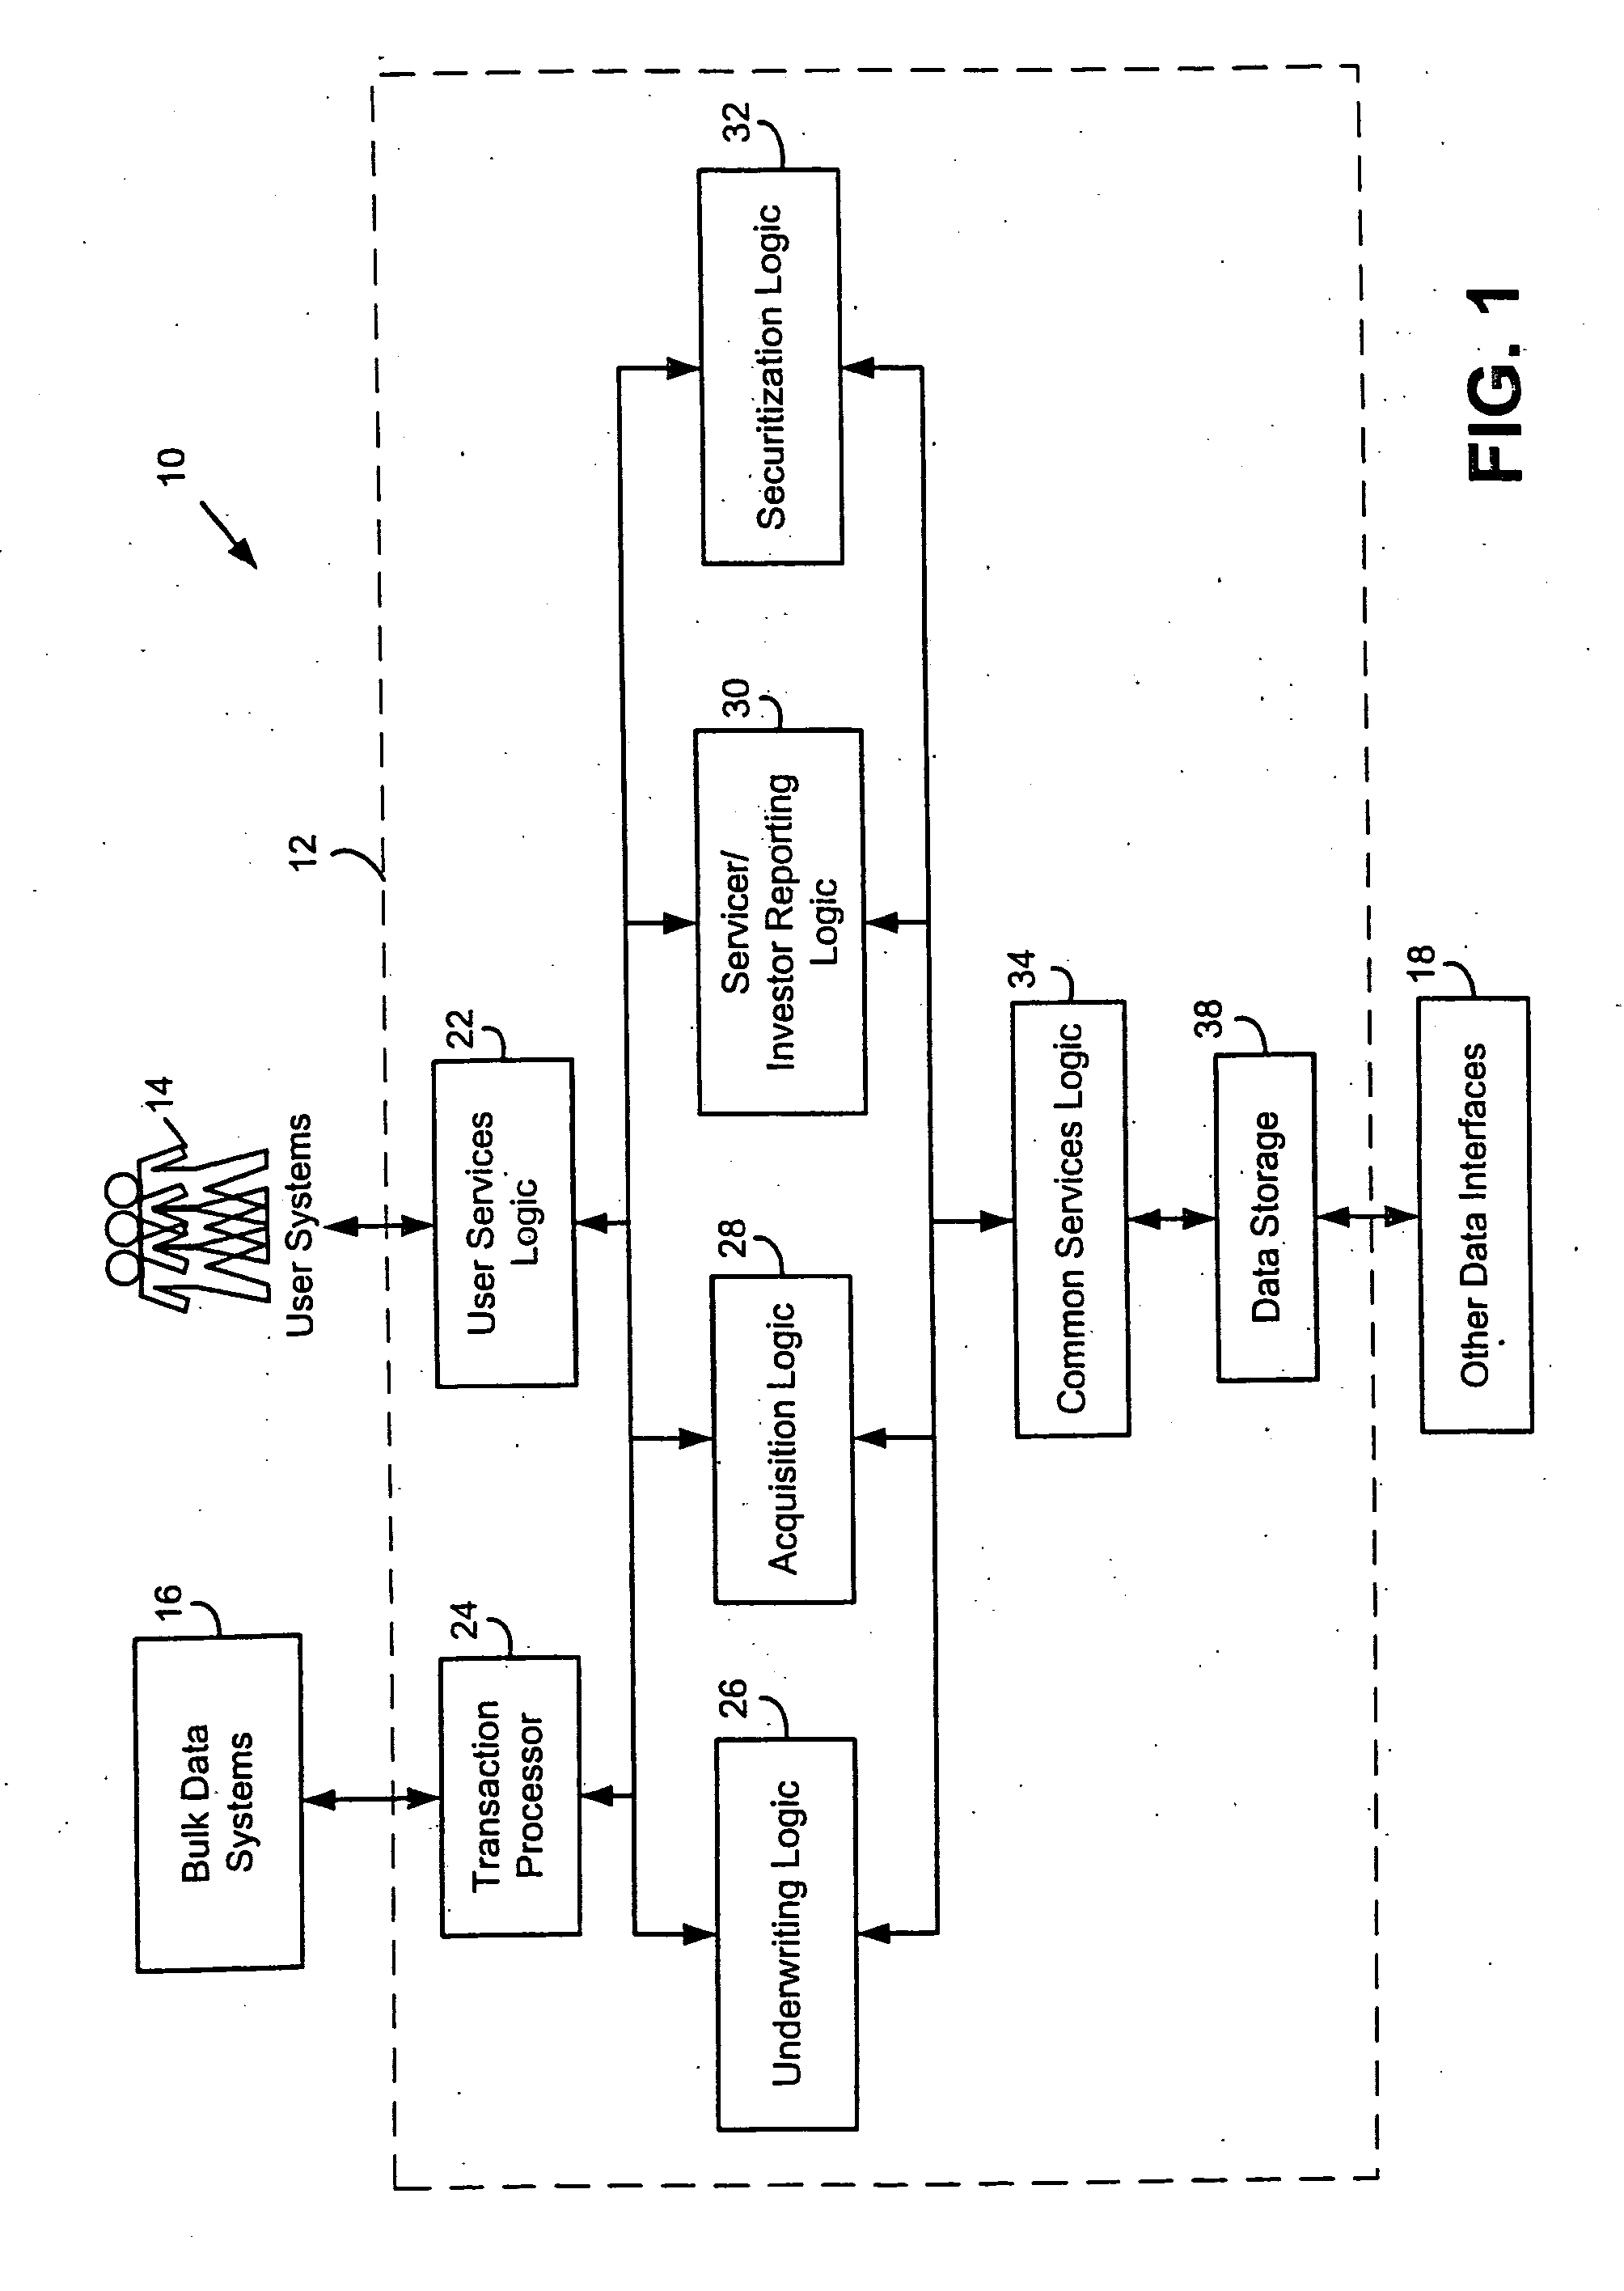 System and method for processing data pertaining to financial assets